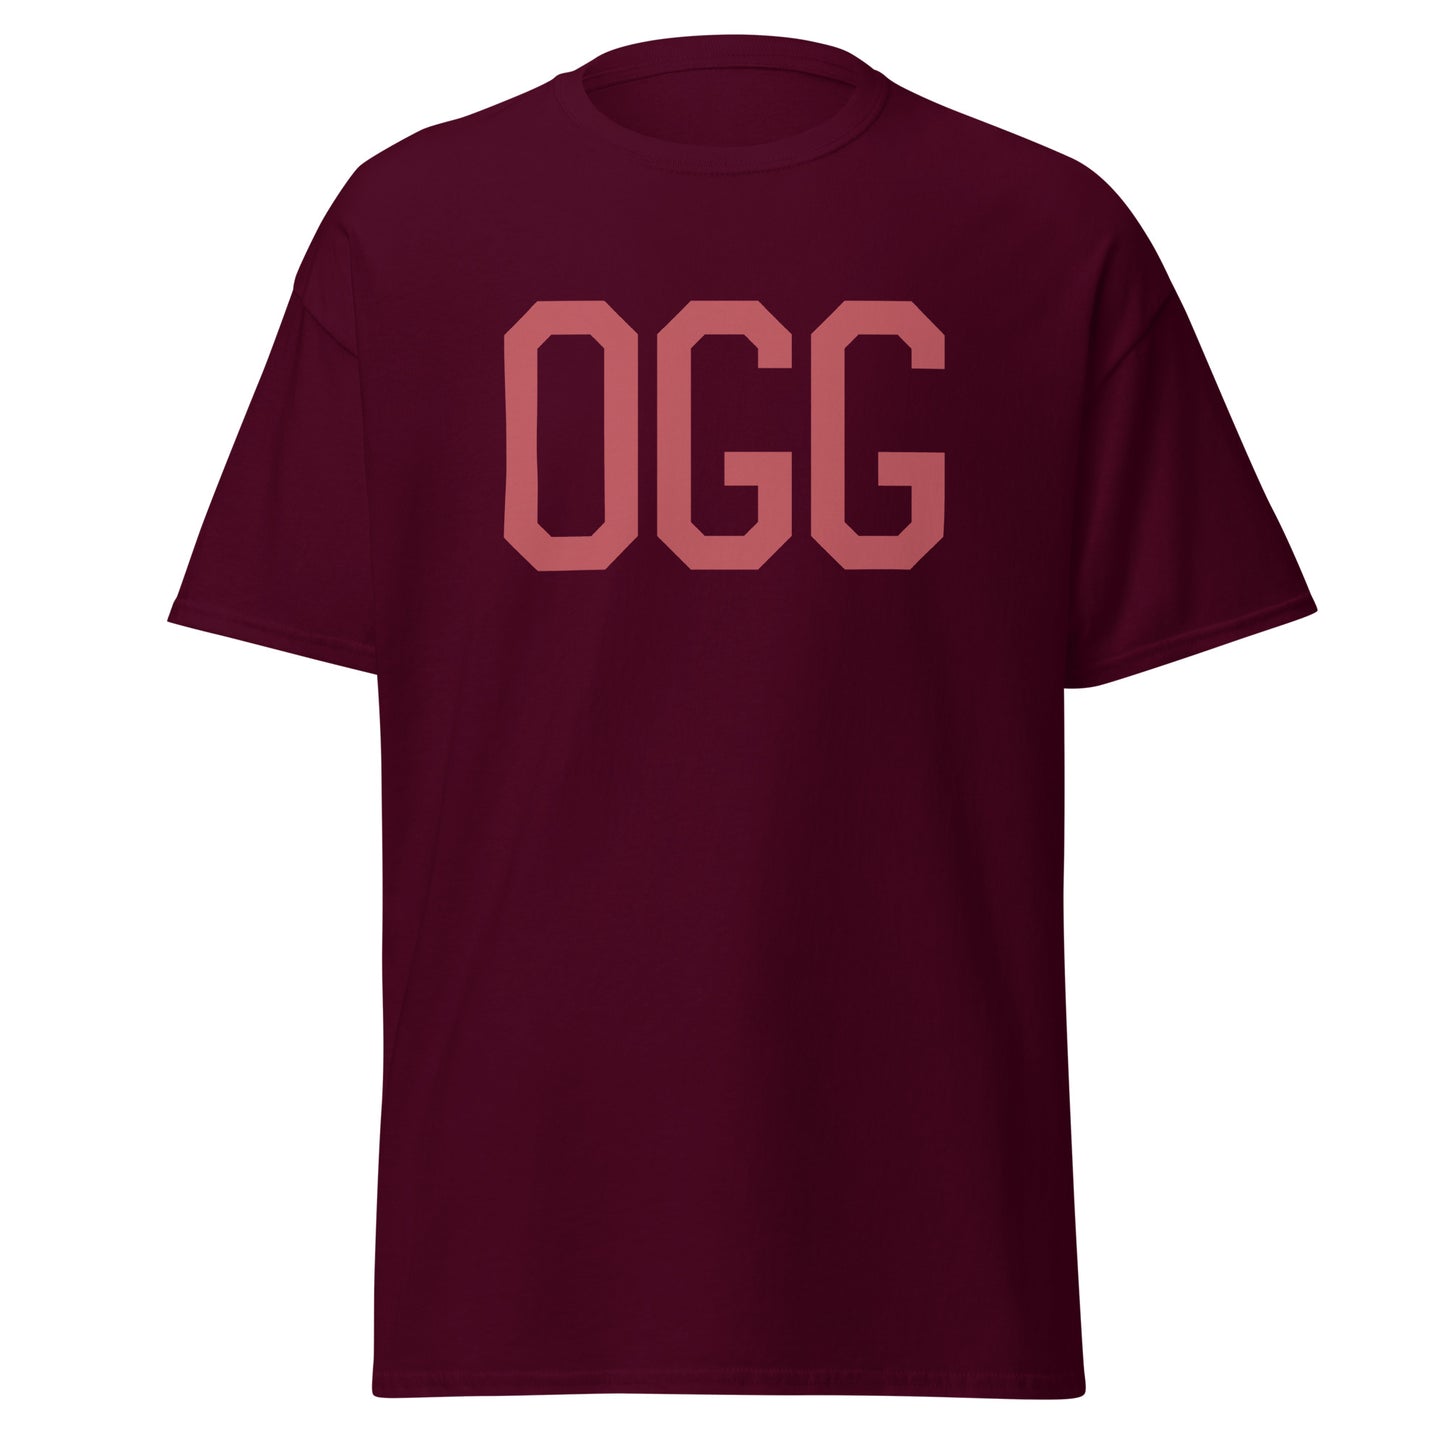 Aviation Enthusiast Men's Tee - Deep Pink Graphic • OGG Maui • YHM Designs - Image 05